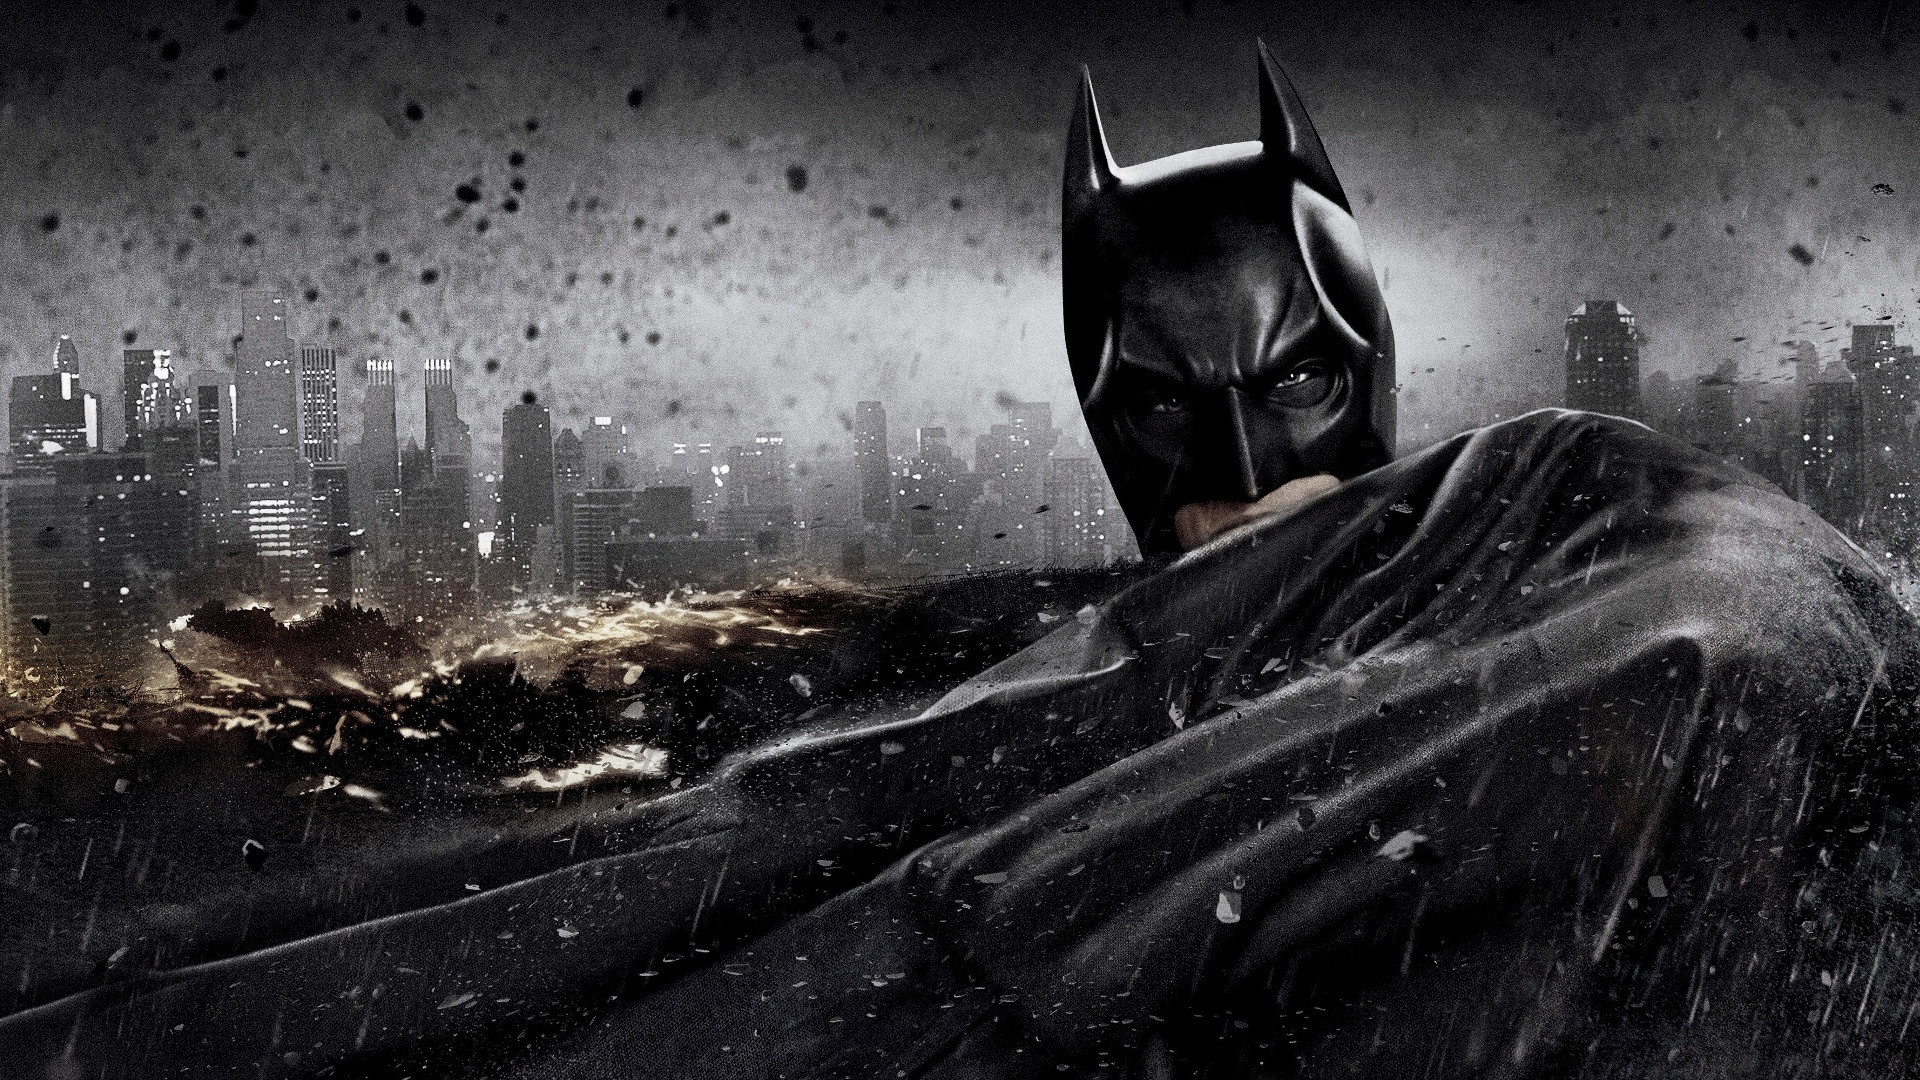 The Dark Knight download the new version for android